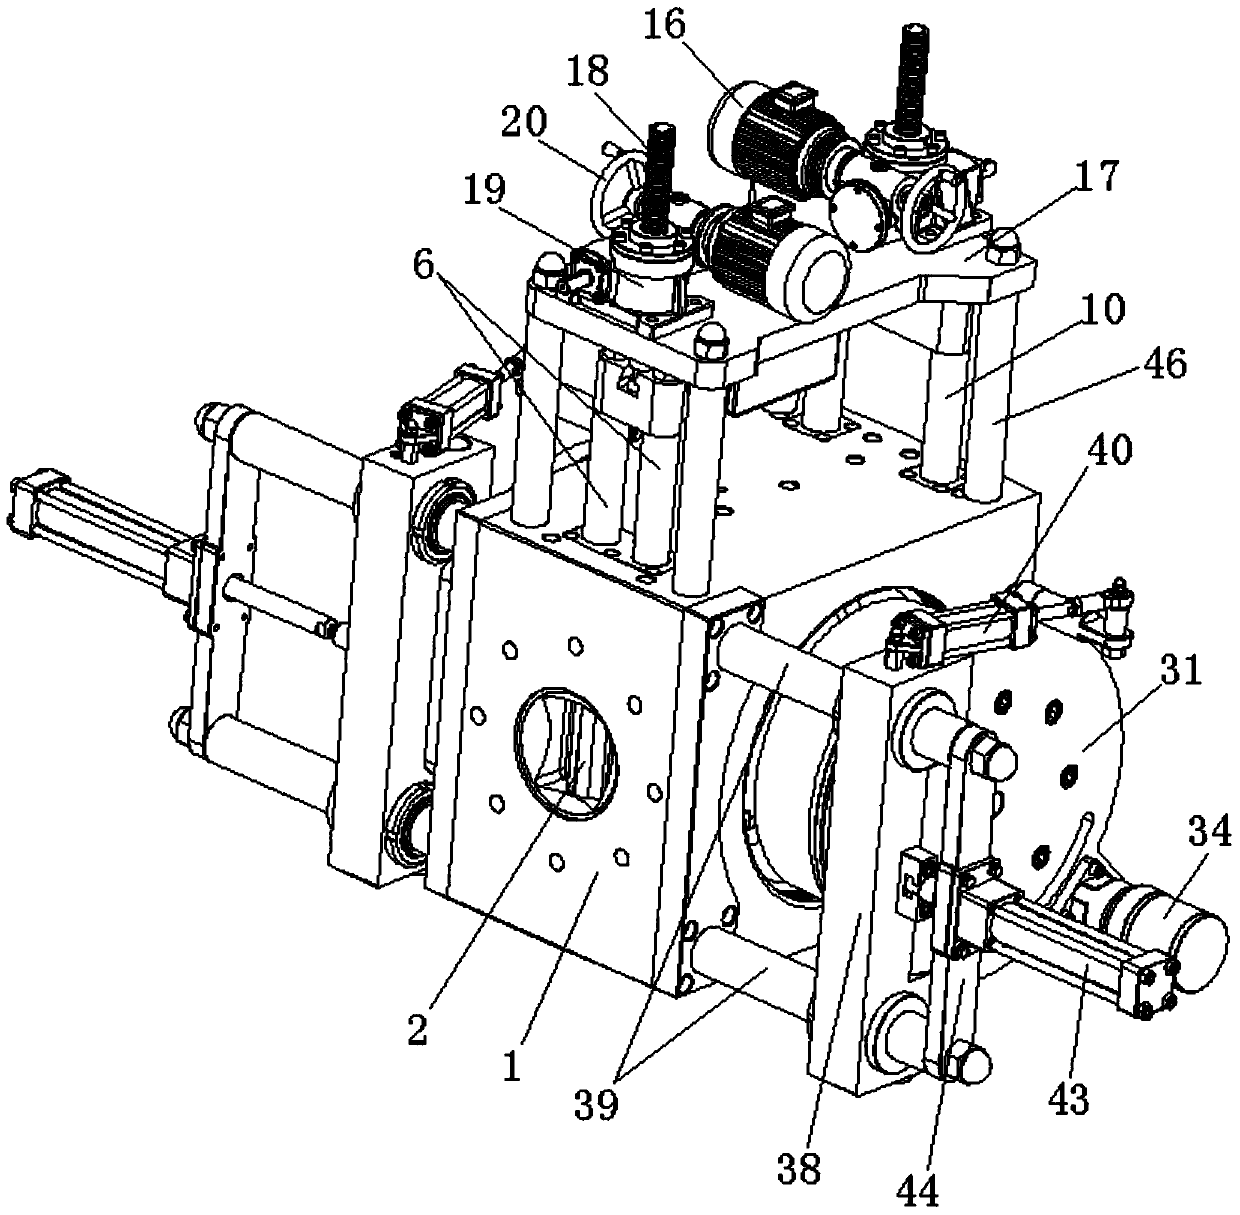 A two-way switchable waveless screen changer